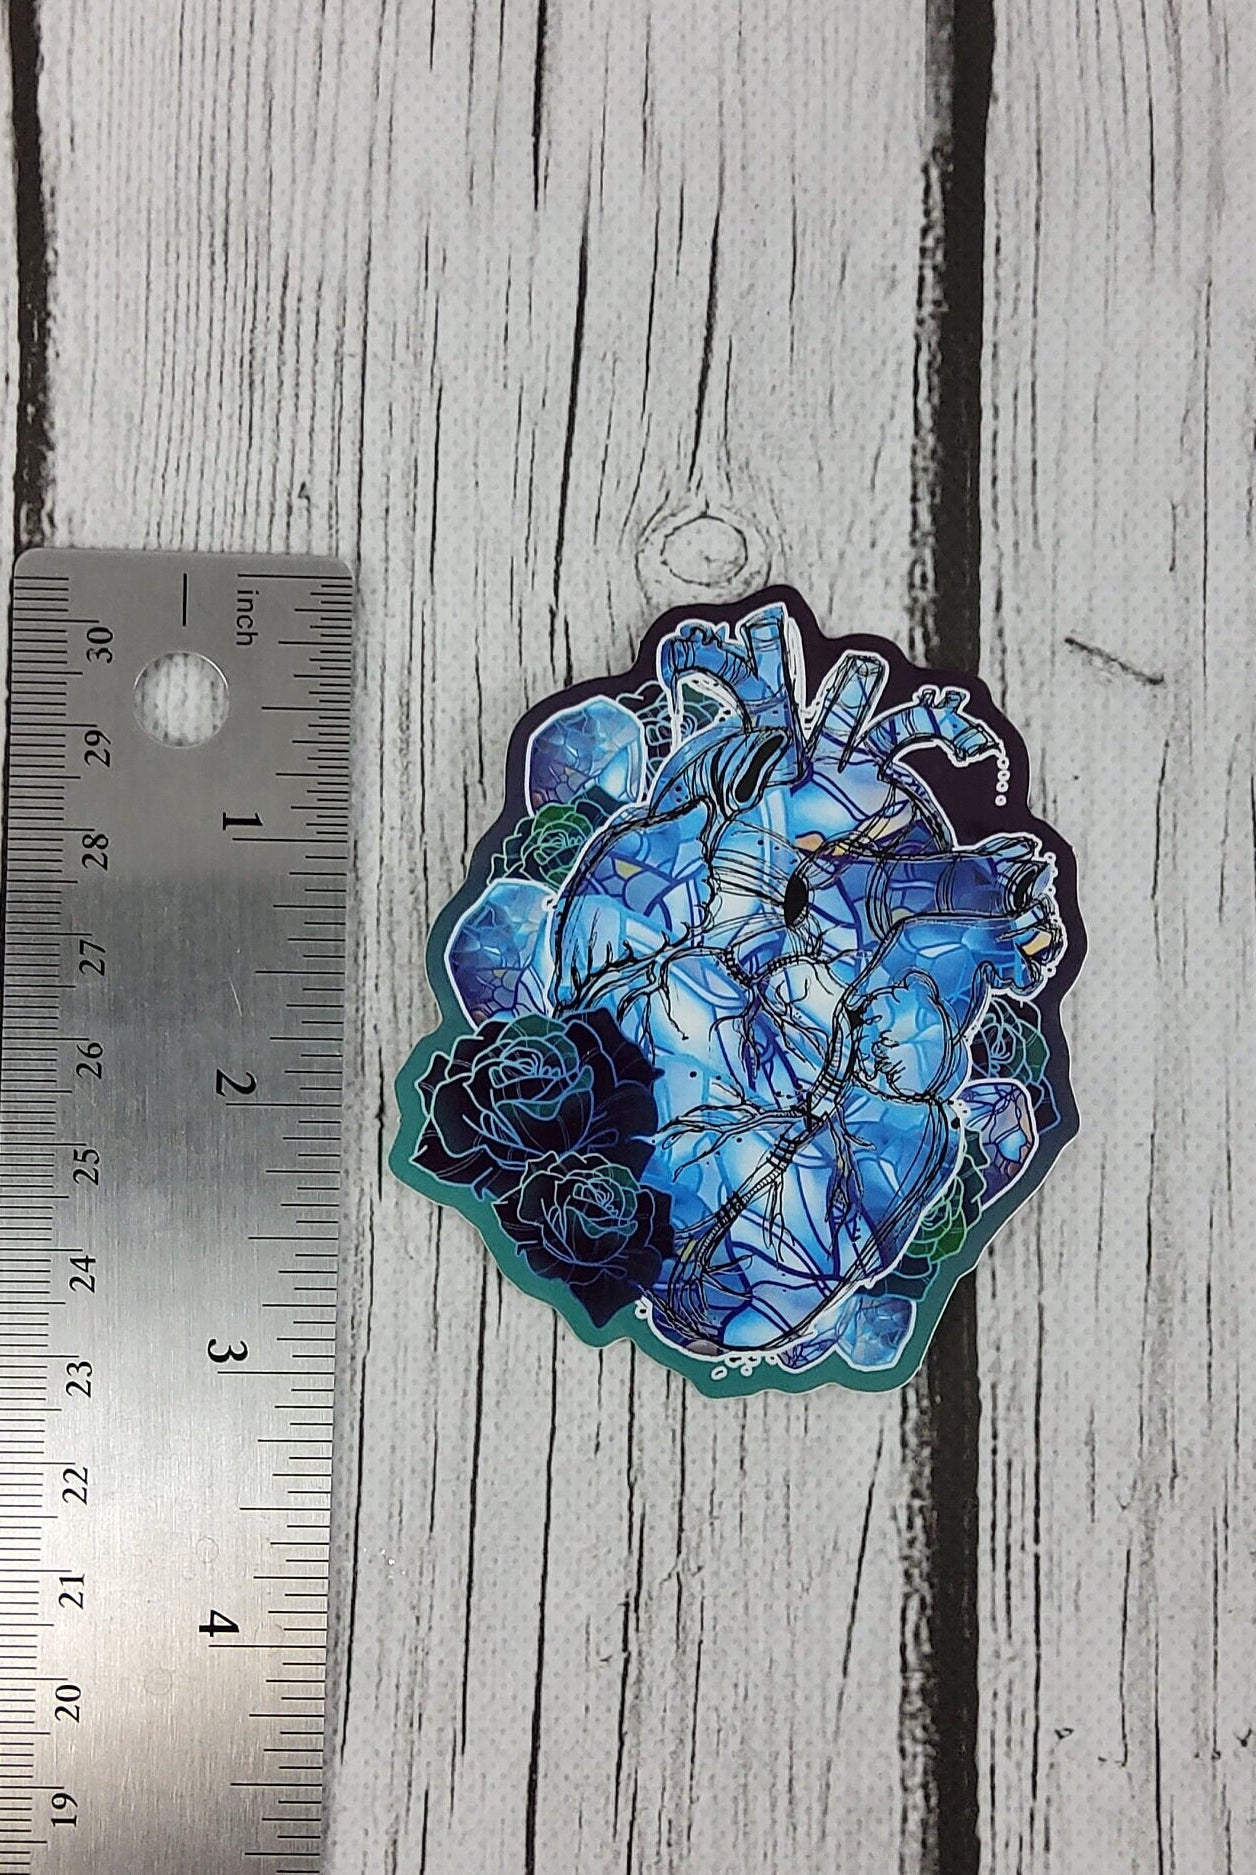 GLOSSY STICKER: June Moonstone Heart and Roses Birthstone Crystal , Moonstone Crystal and Roses , Moonstone Crystal Sticker , Roses